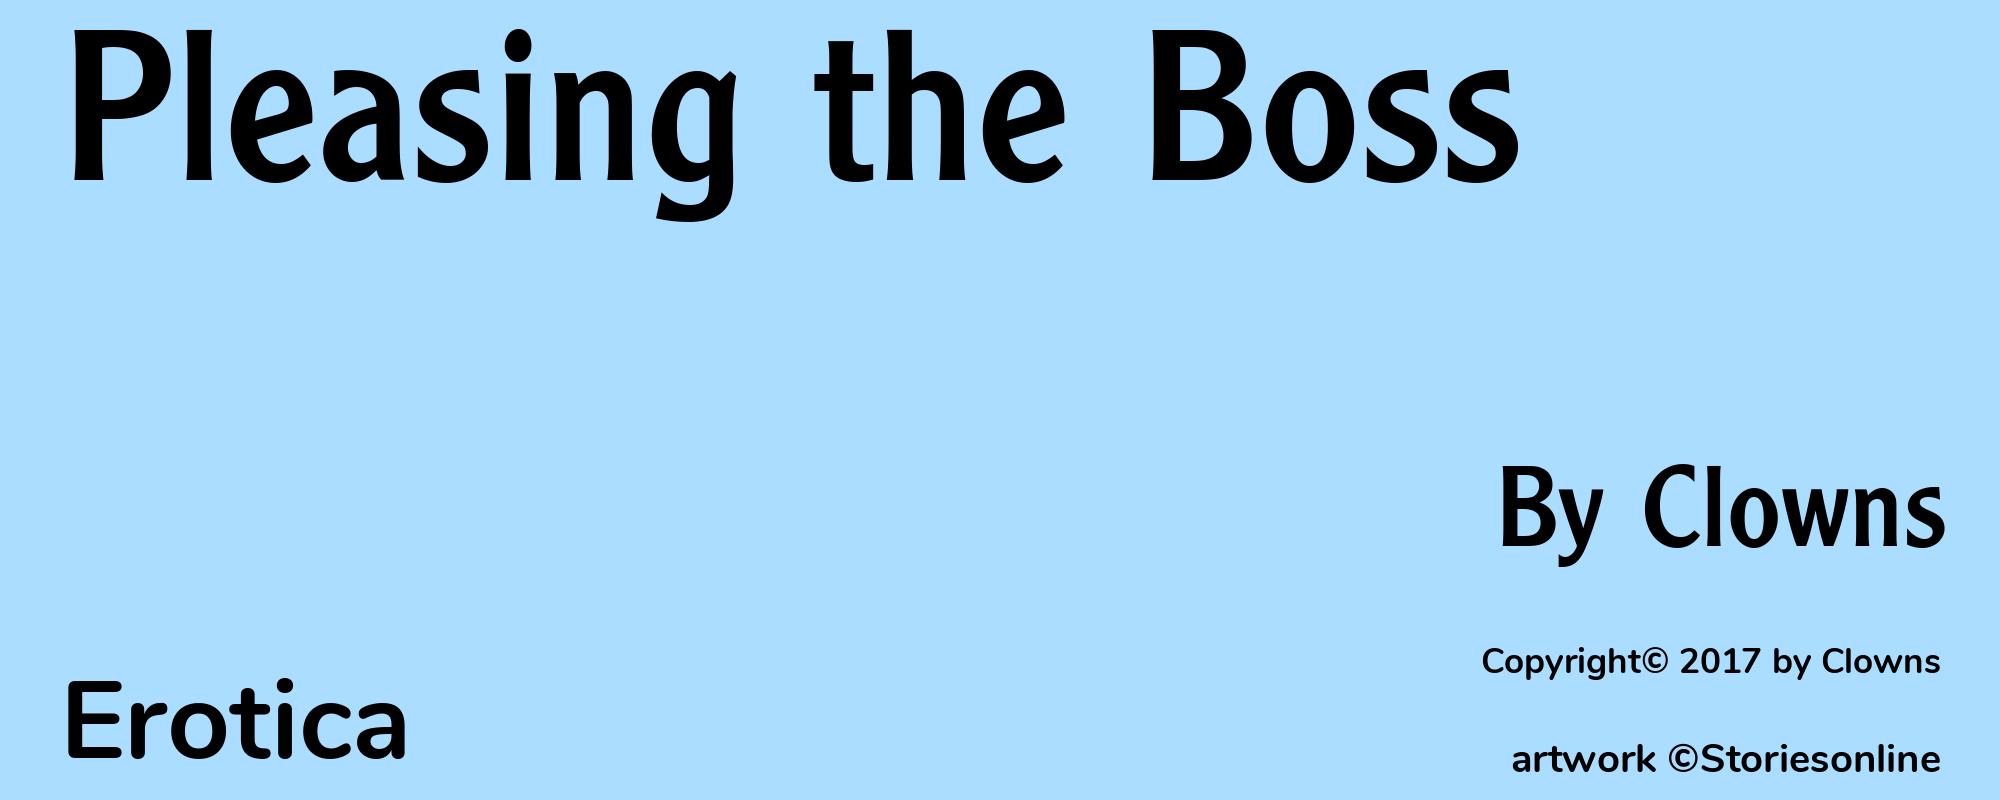 Pleasing the Boss - Cover